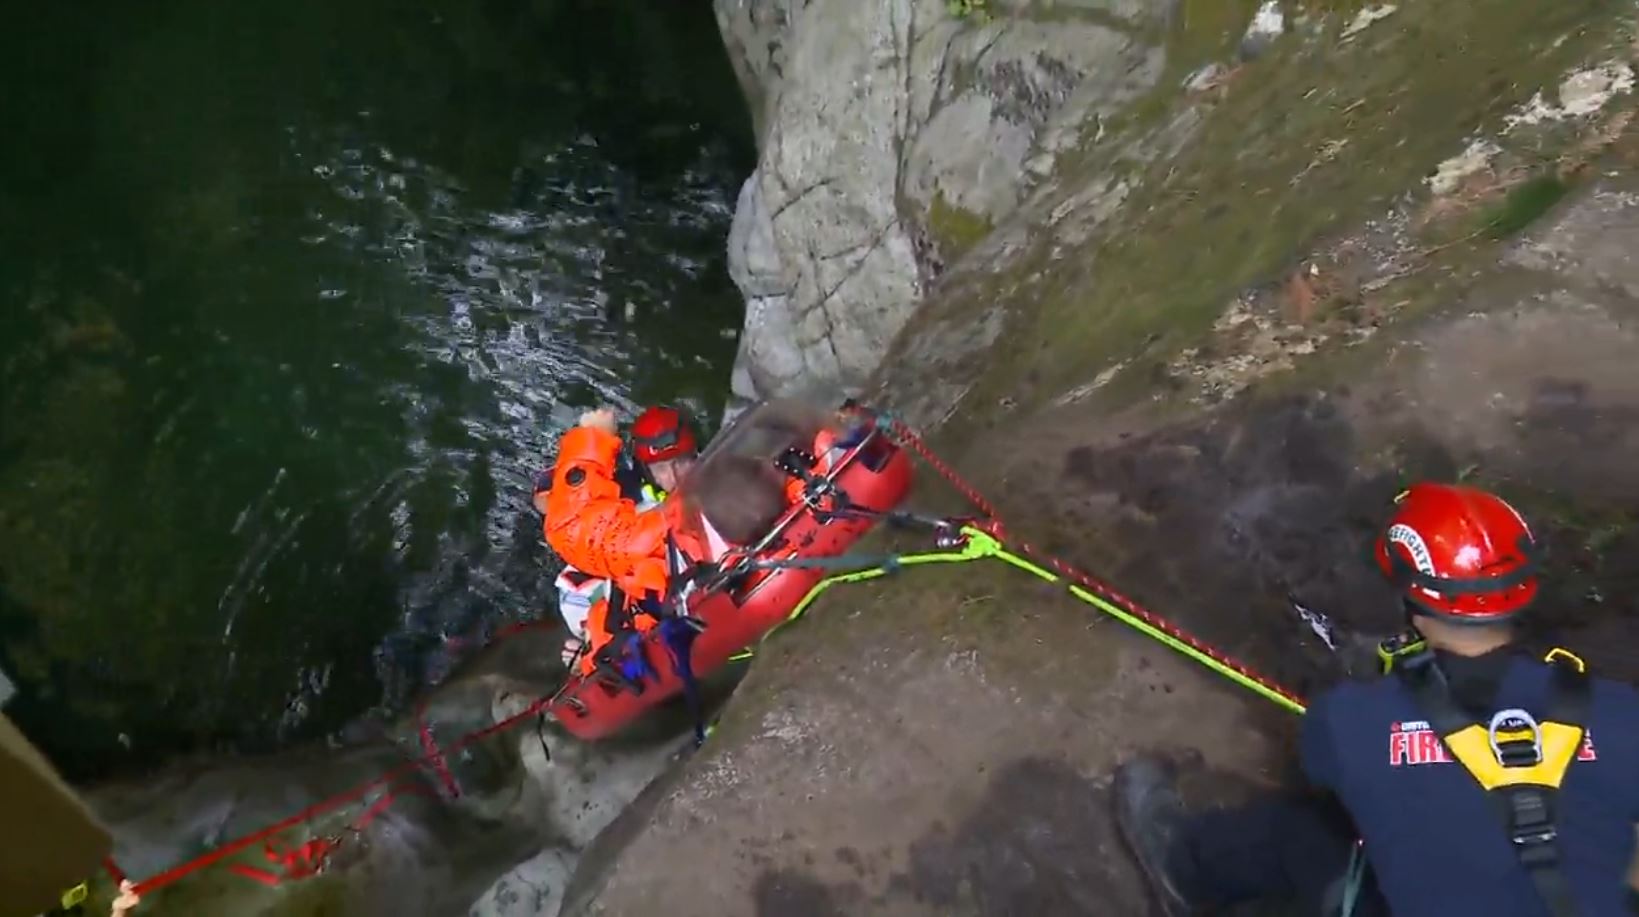 North Vancouver crews called to rescue injured cliff jumper in Lynn Canyon